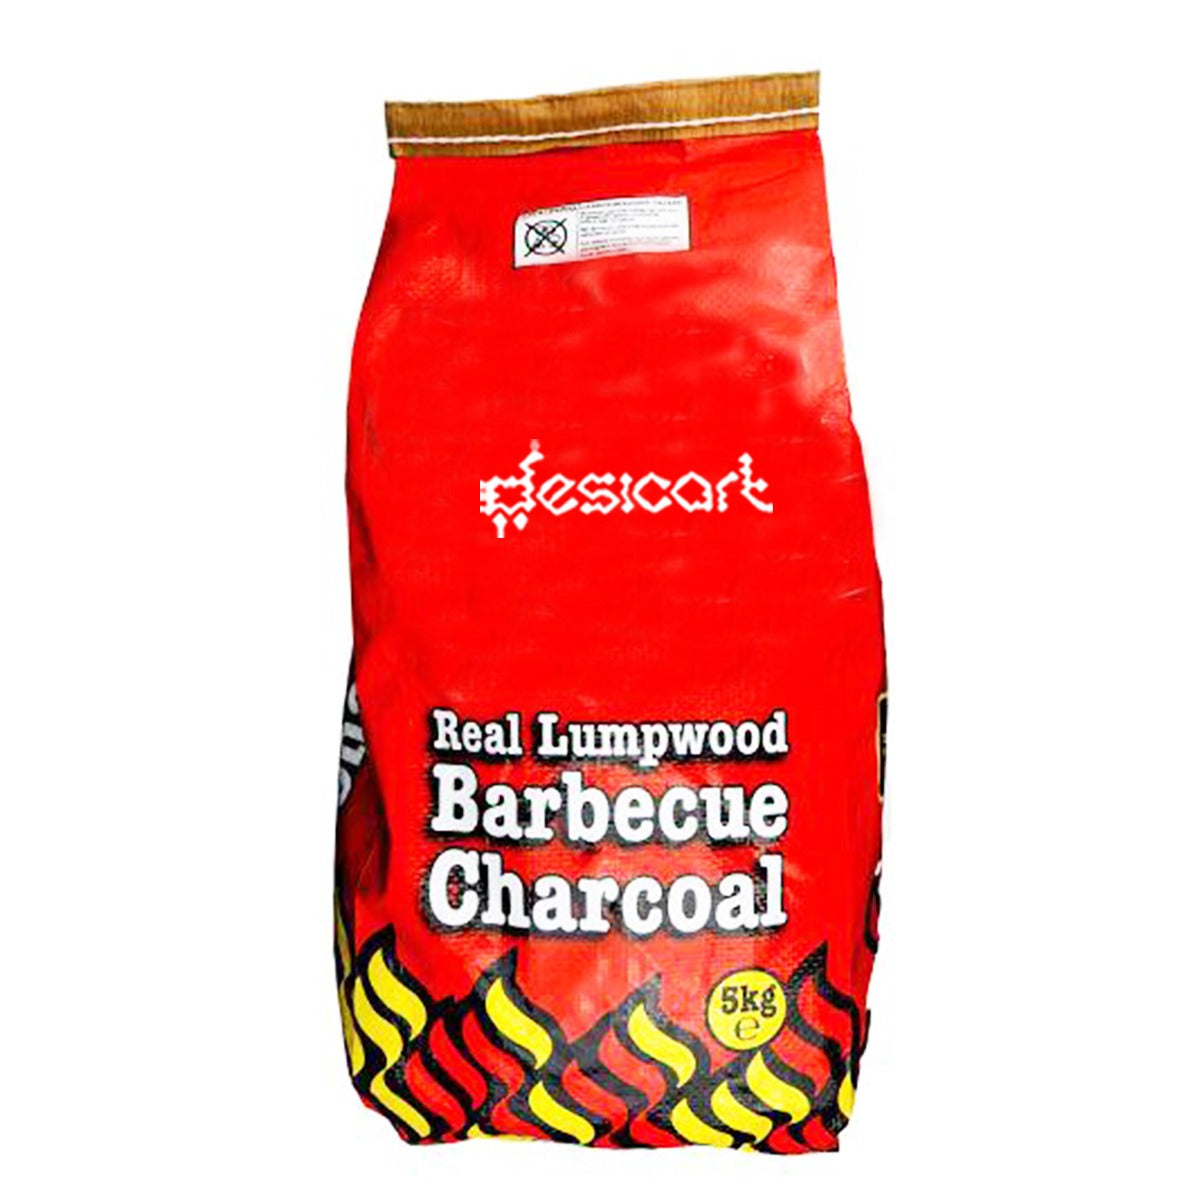 REAL LUMPWOOD BARBECUE CHARCOAL 5KG